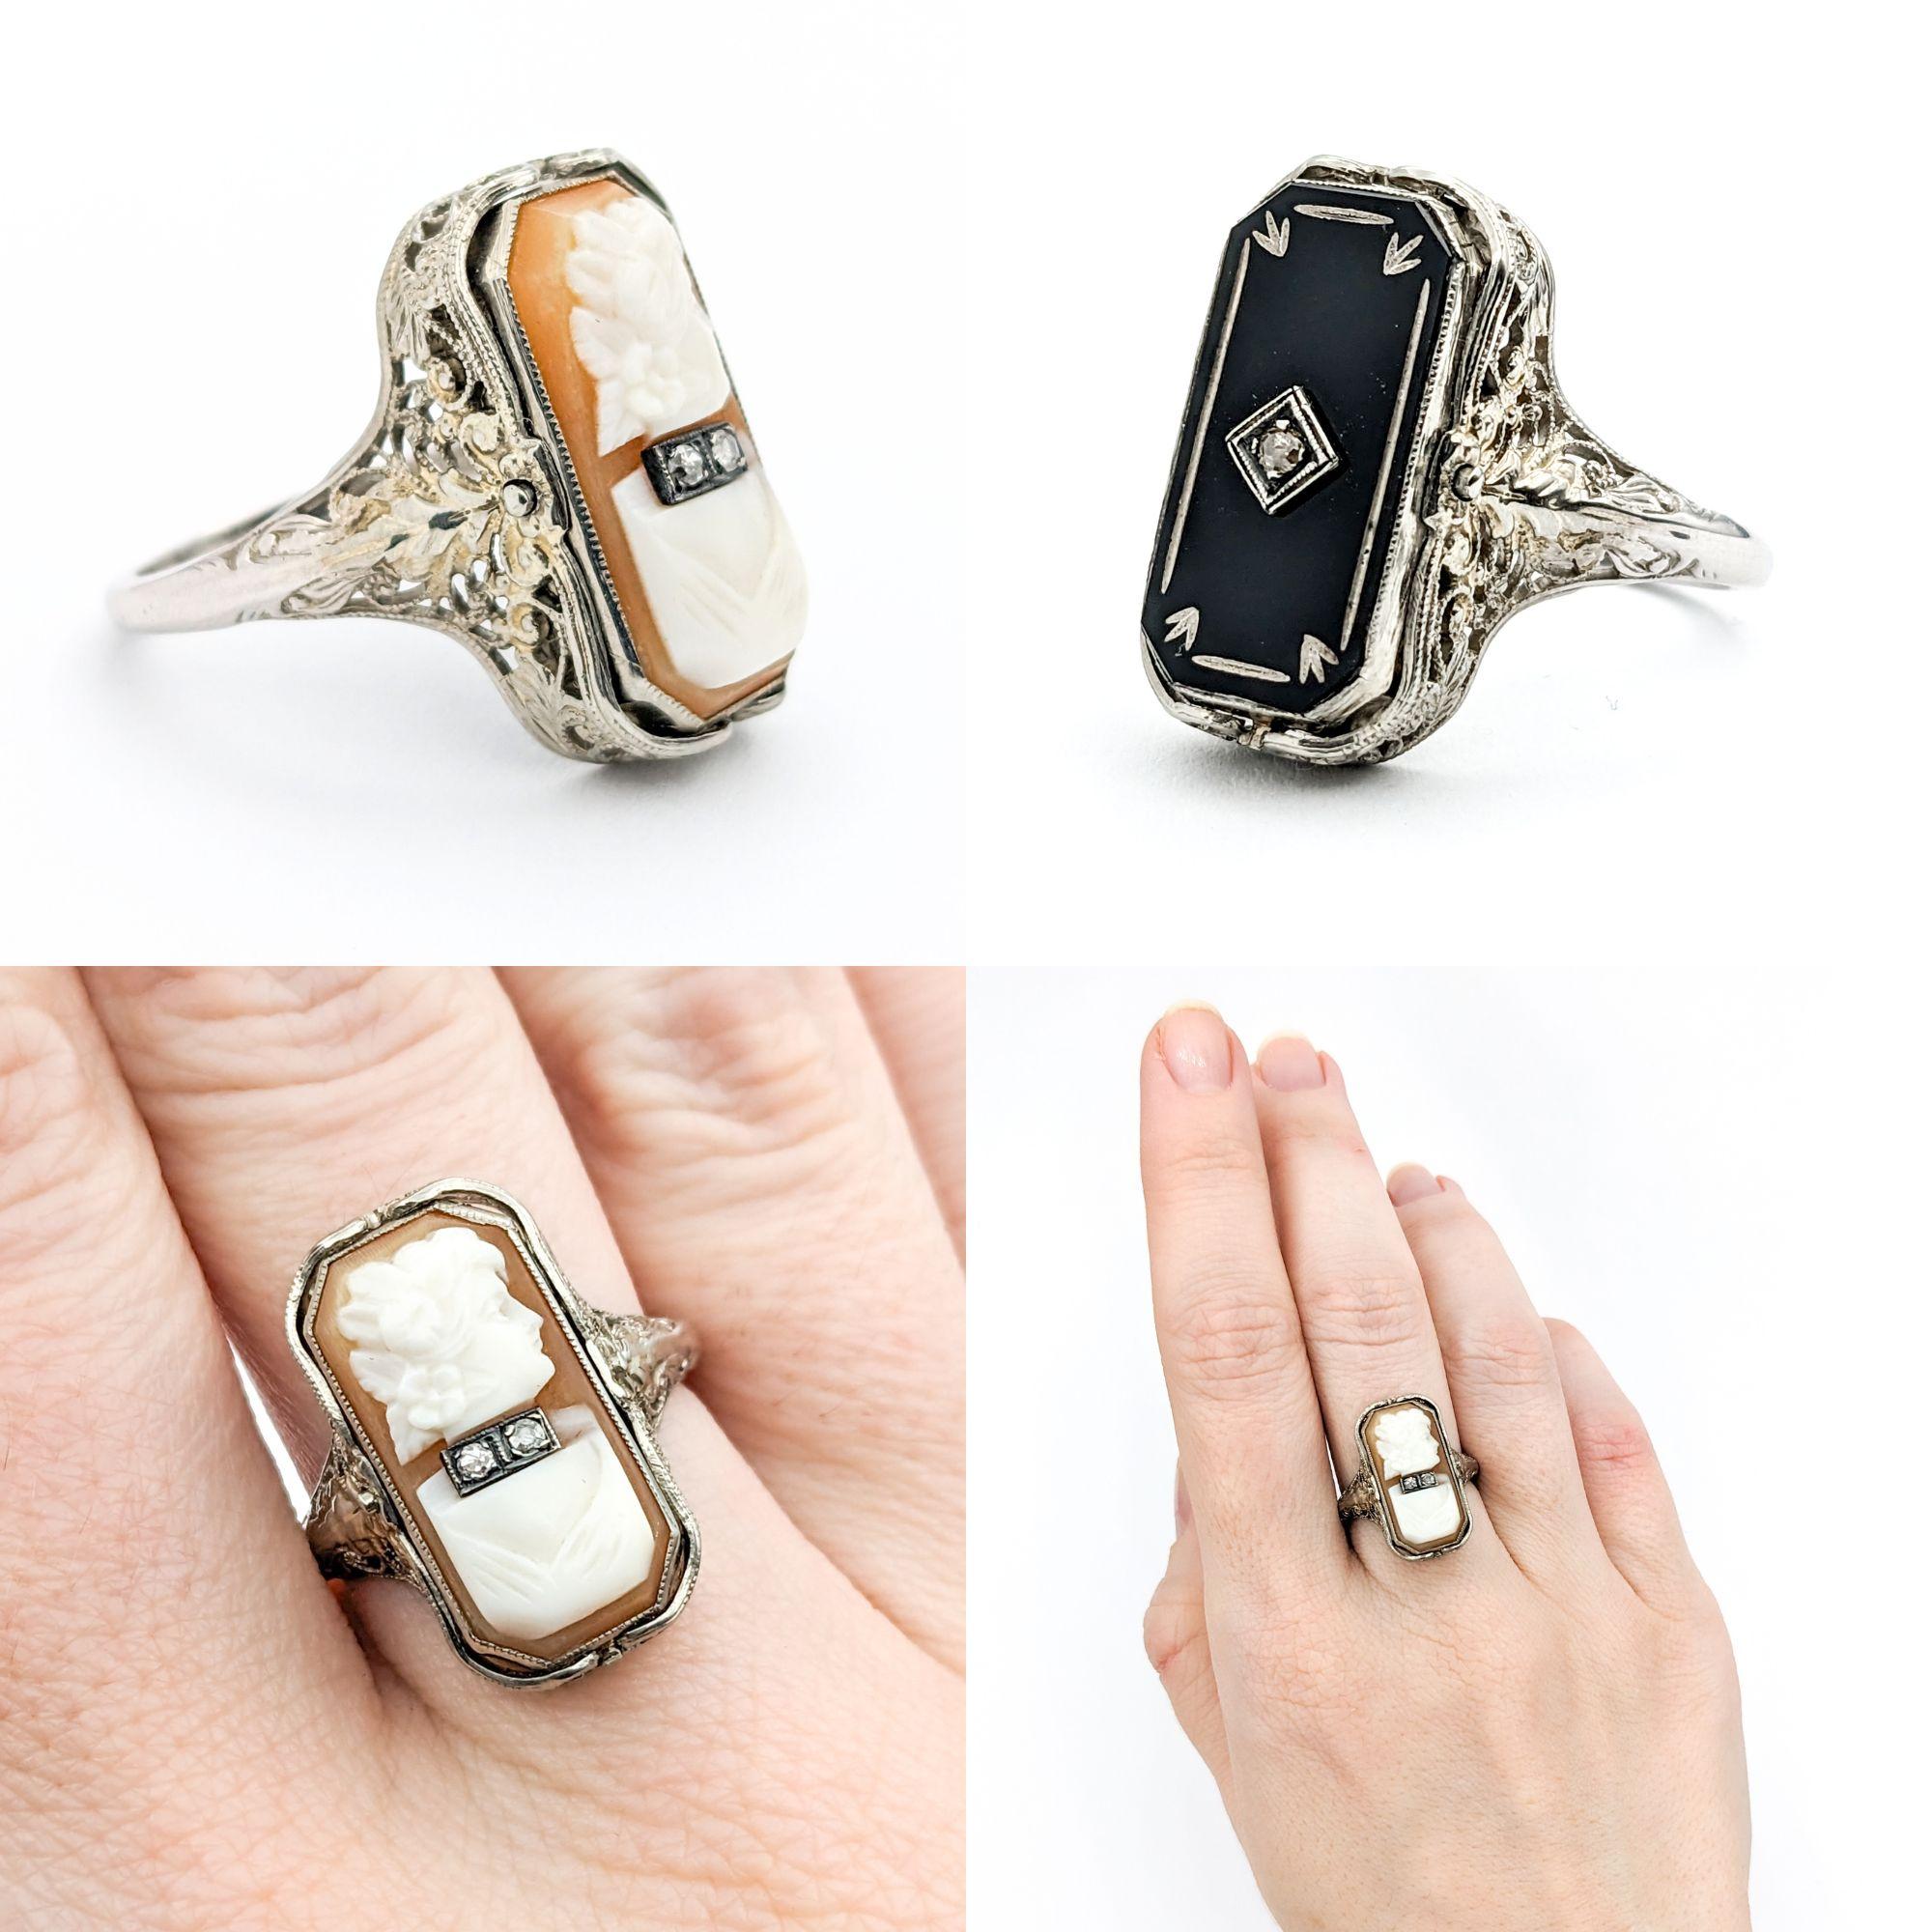 Antique Cameo Habille Diamond & Onyx Flip Ring In White Gold

Introducing an exquisite Antique Flip Ring from the Art Deco era, skillfully crafted in 14k White gold. This ring is a stunning representation of the Art Deco style, renowned for its